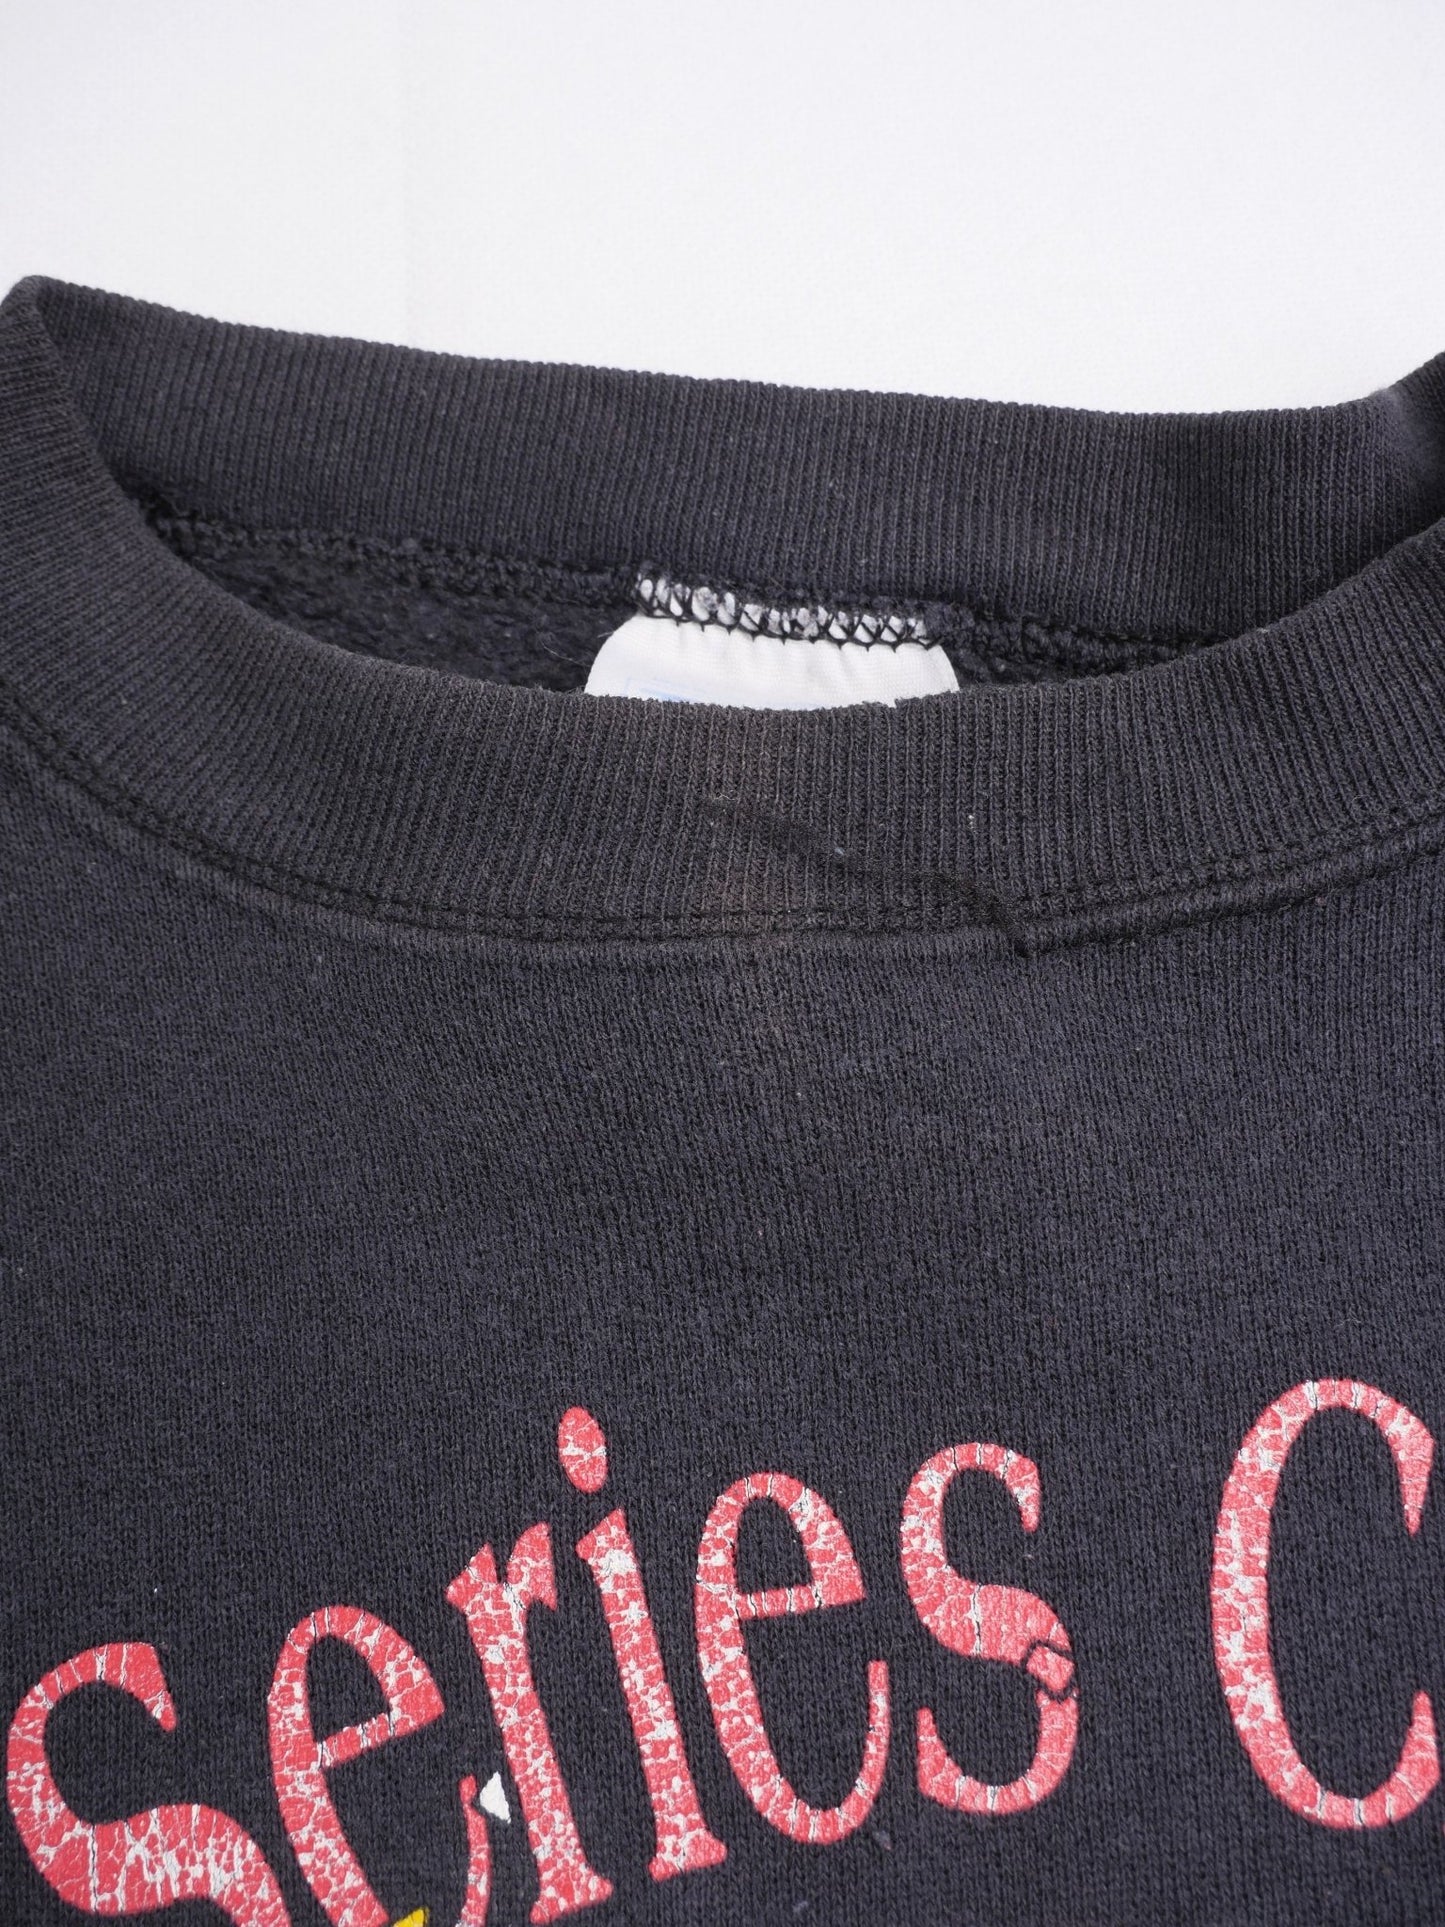 World Series Champions printed Spellout 1991 Vintage Sweater - Peeces